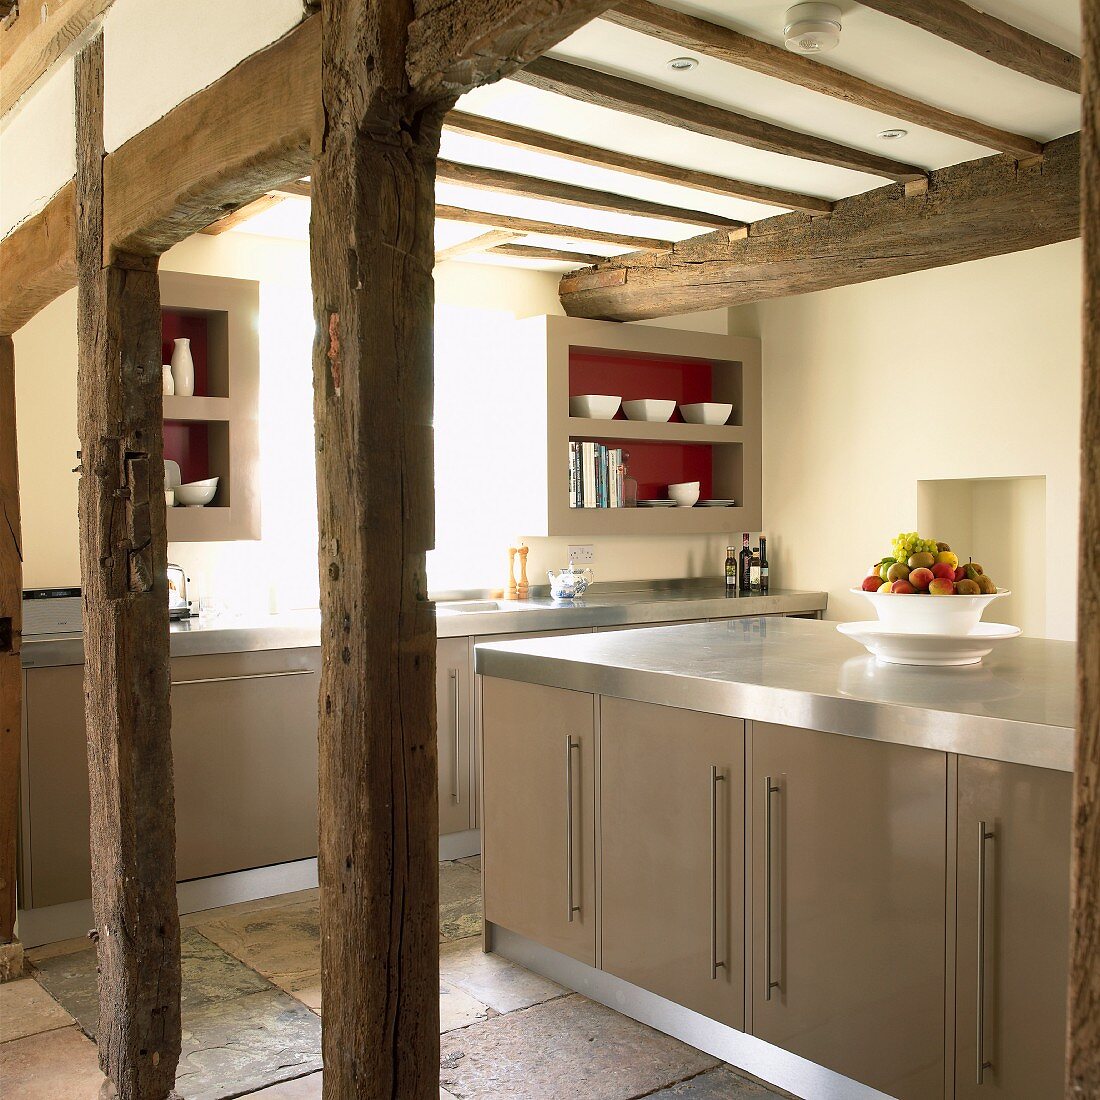 Modern fitted kitchen with island counter in old, half-timbered house with exposed beam structure